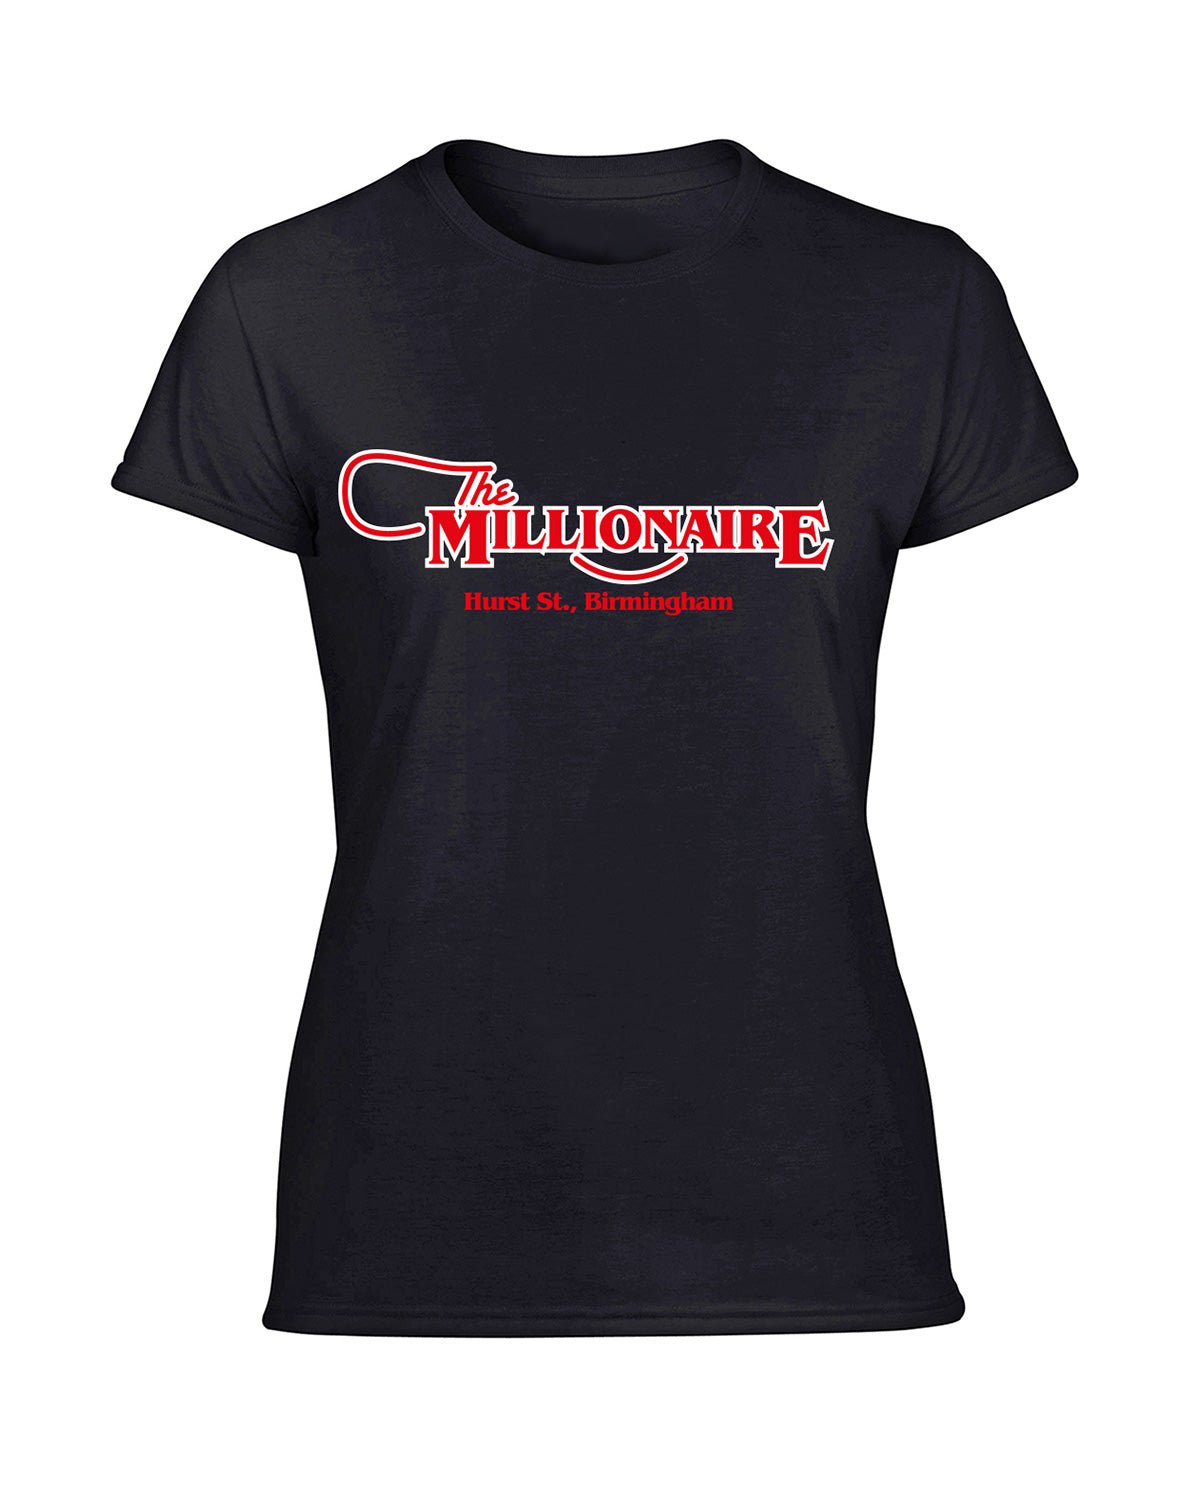 The Millionaire ladies fit T-shirt - various colours - Dirty Stop Outs